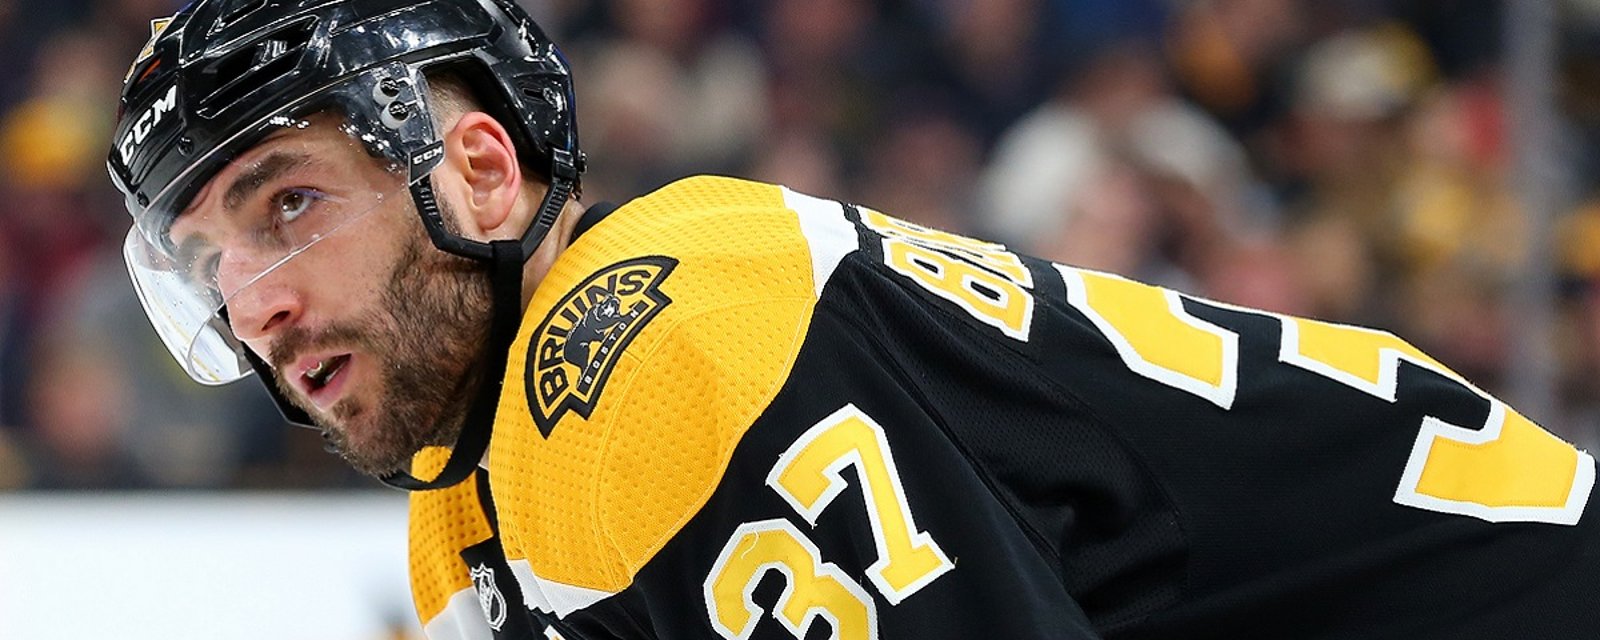 Bruins attempting to acquire former first round pick following Bergeron injury.